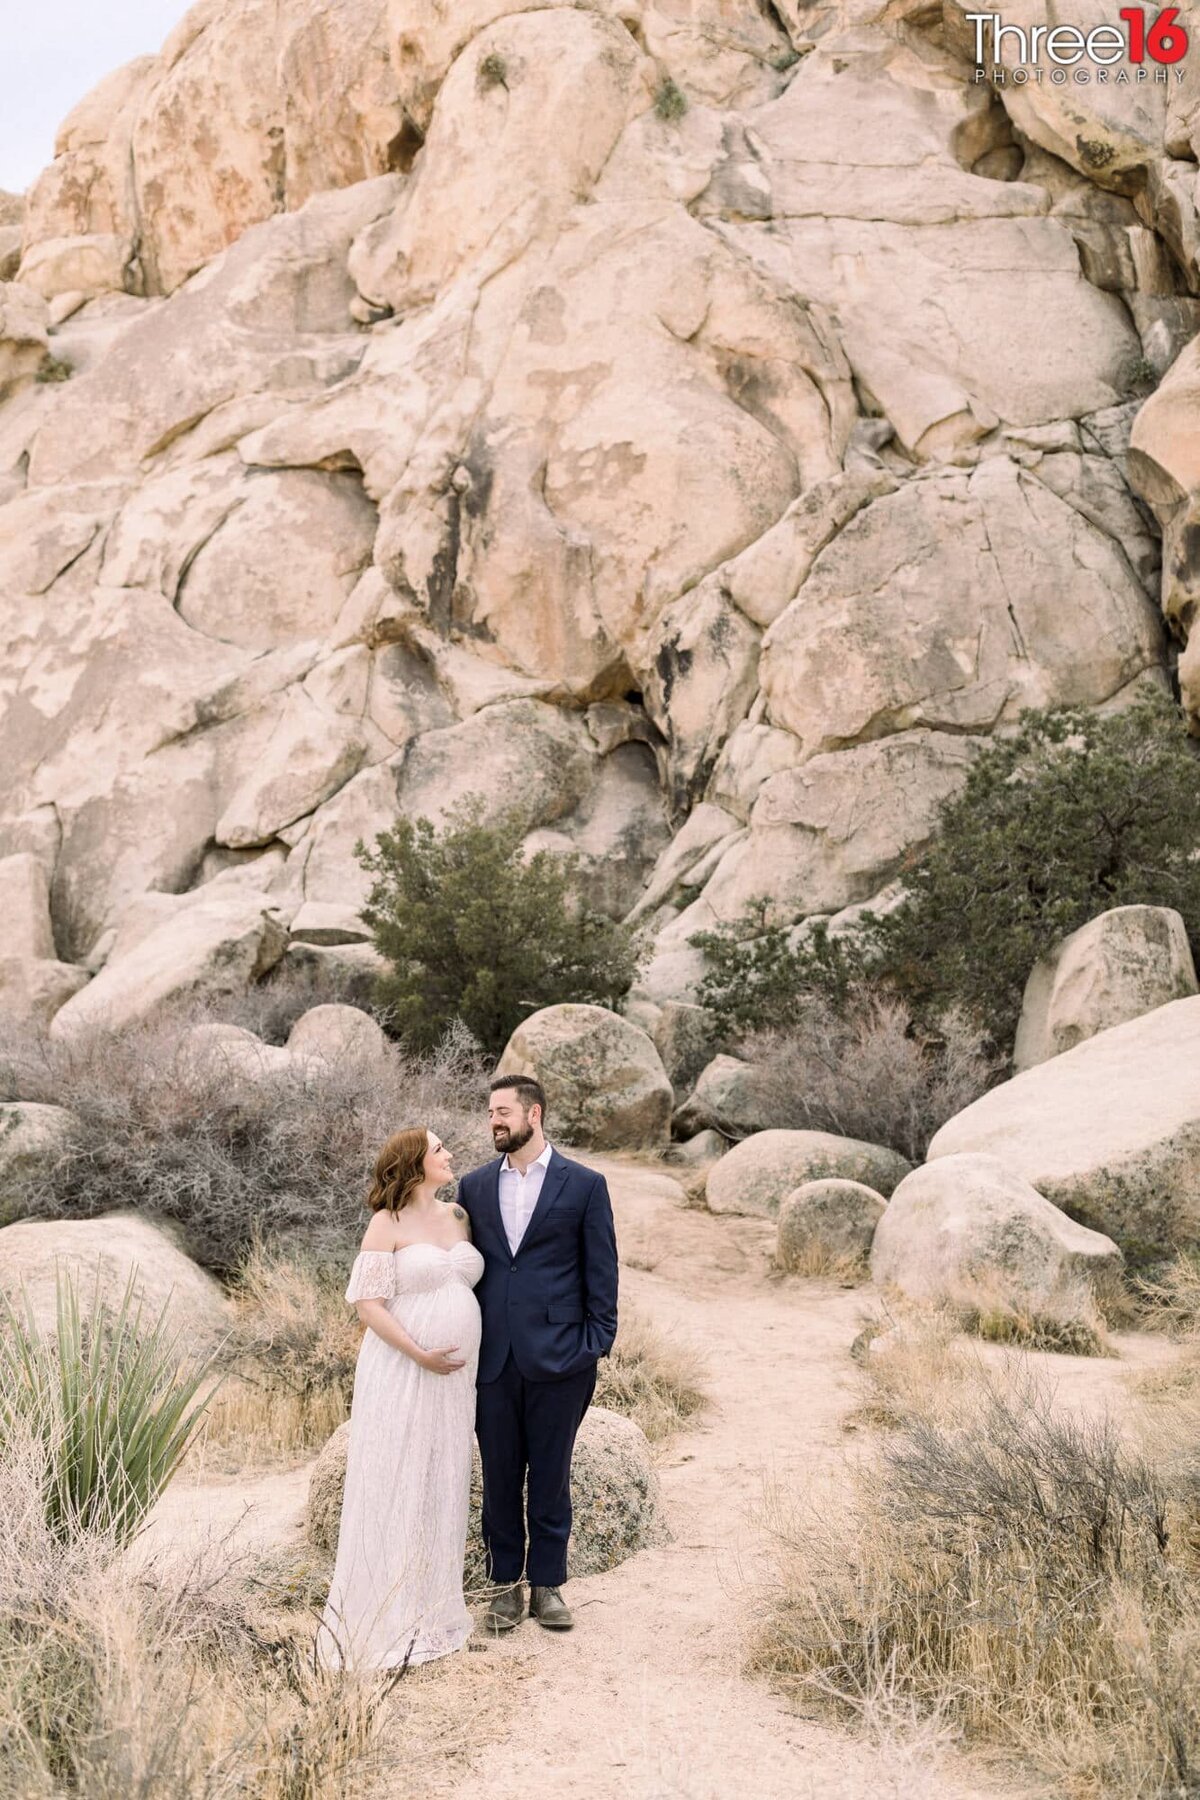 Soon to be parents look at each as they pose near the rocks in Joshua Tree National Park